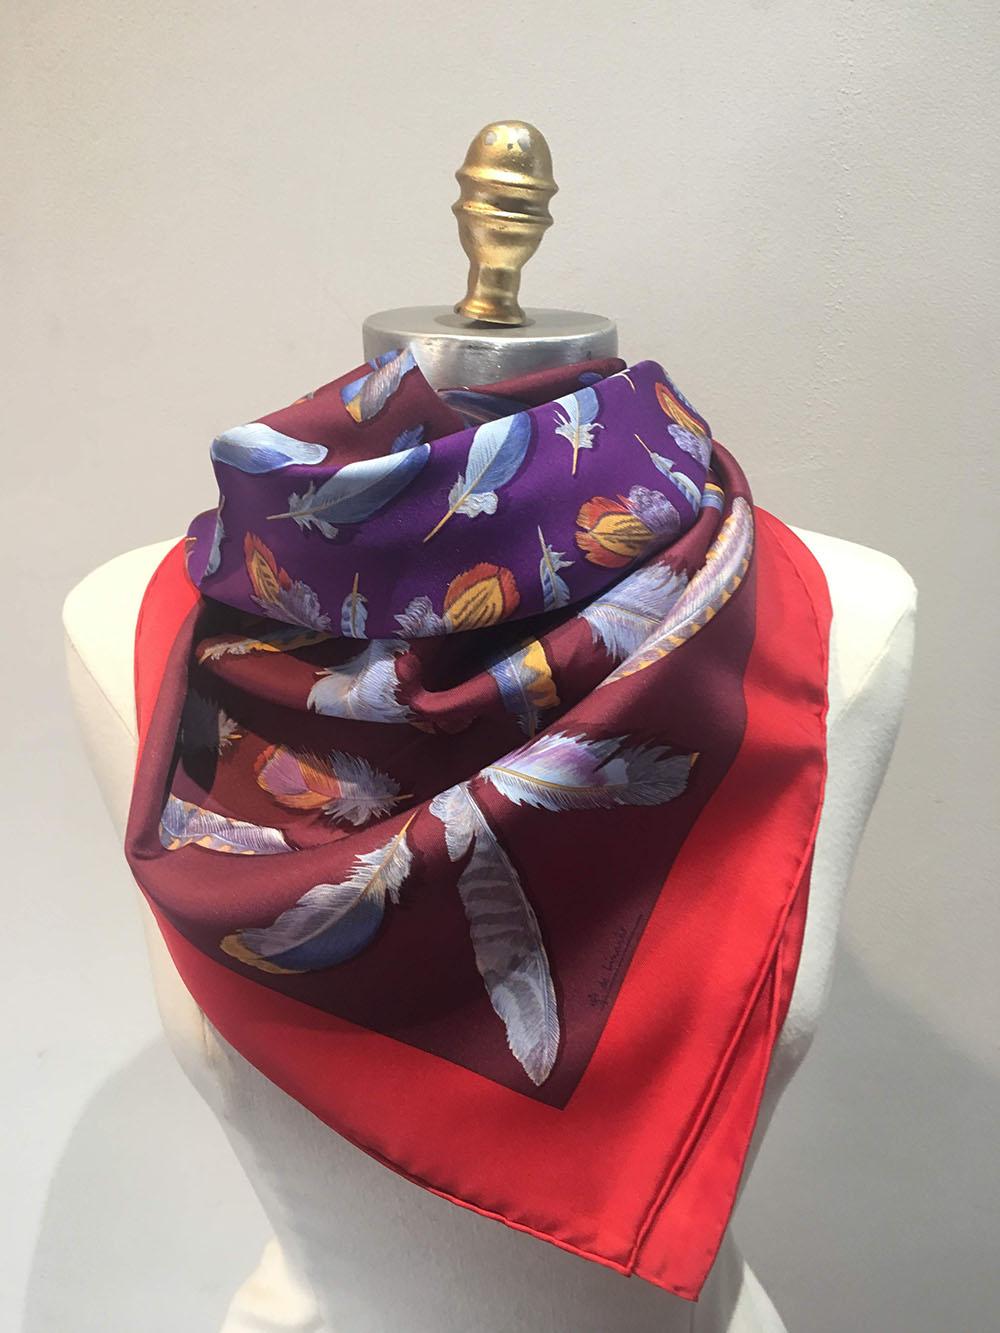 BEAUTIFUL Hermes vintage Plumes silk scarf in excellent condition. Original silk screen design c1953 by Henri de Linares features various multicolor beautiful bird feathers over a purple and maroon background surrounded by a red blue border. 100%